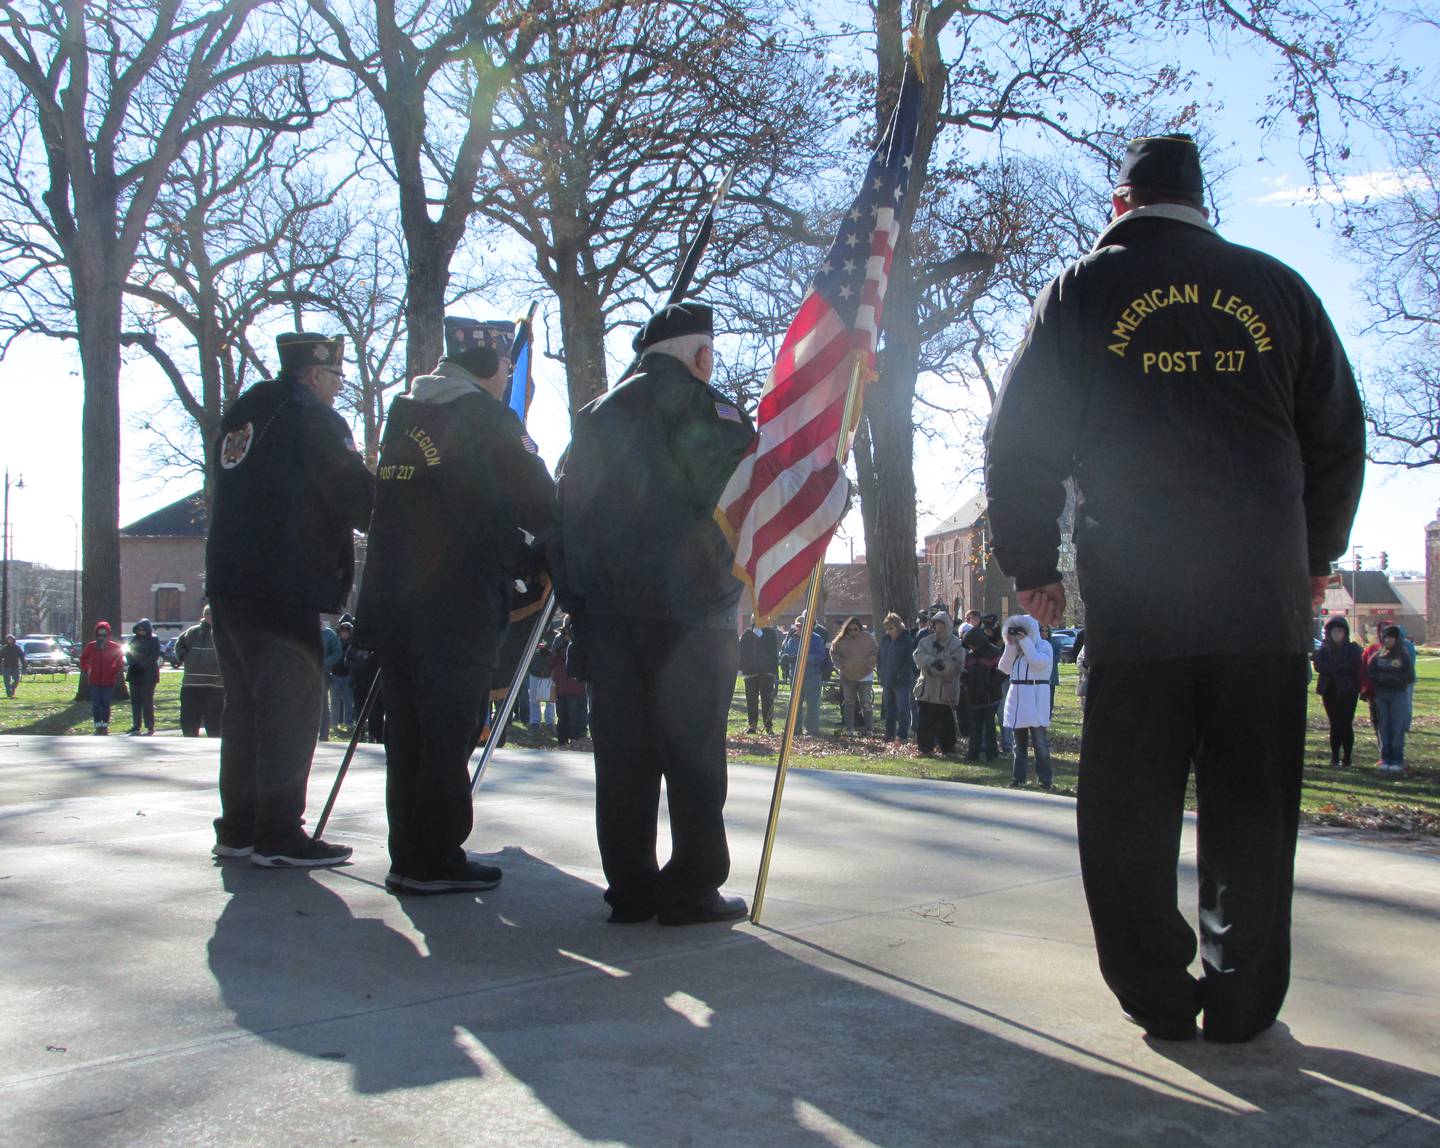 Flags are posted Friday, Nov. 11, 2022, during the Veterans Day ceremony at Plumb Pavilion in Streator's City Park. Flags are posted Friday, Nov. 11, 2022, during the Veterans Day ceremony at Plumb Pavilion in Streator's City Park. Reno Pence served as the officer of the day.